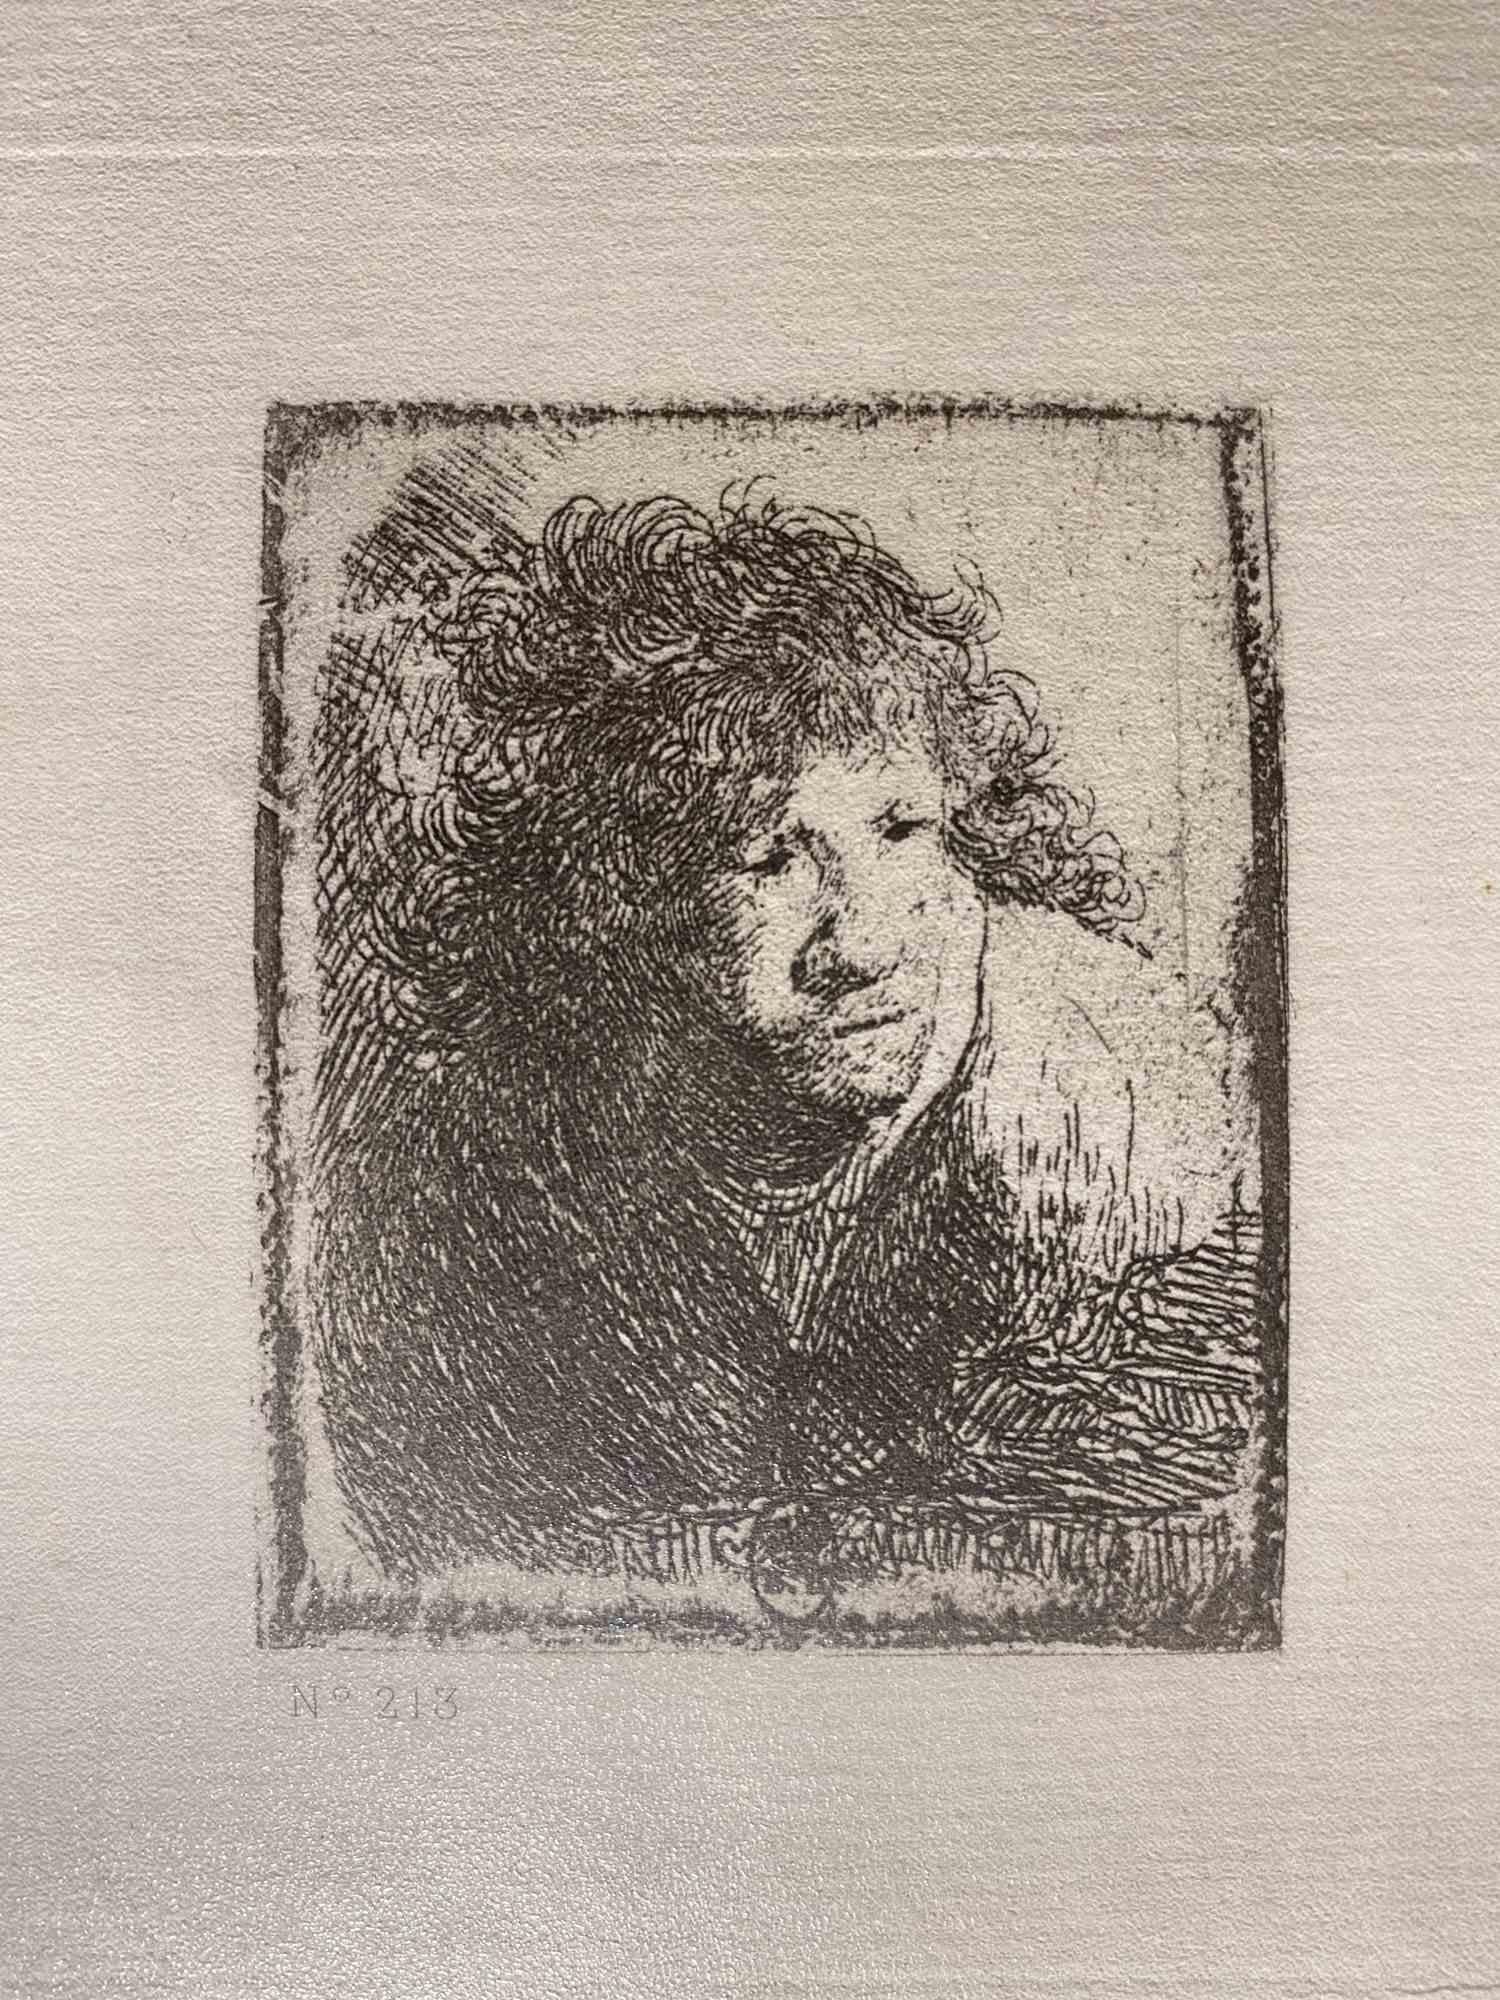 Charles Amand Durand Figurative Print - Self-Portrait, Leaning Forward, Listening-Engraving after Rembrandt-19th Century